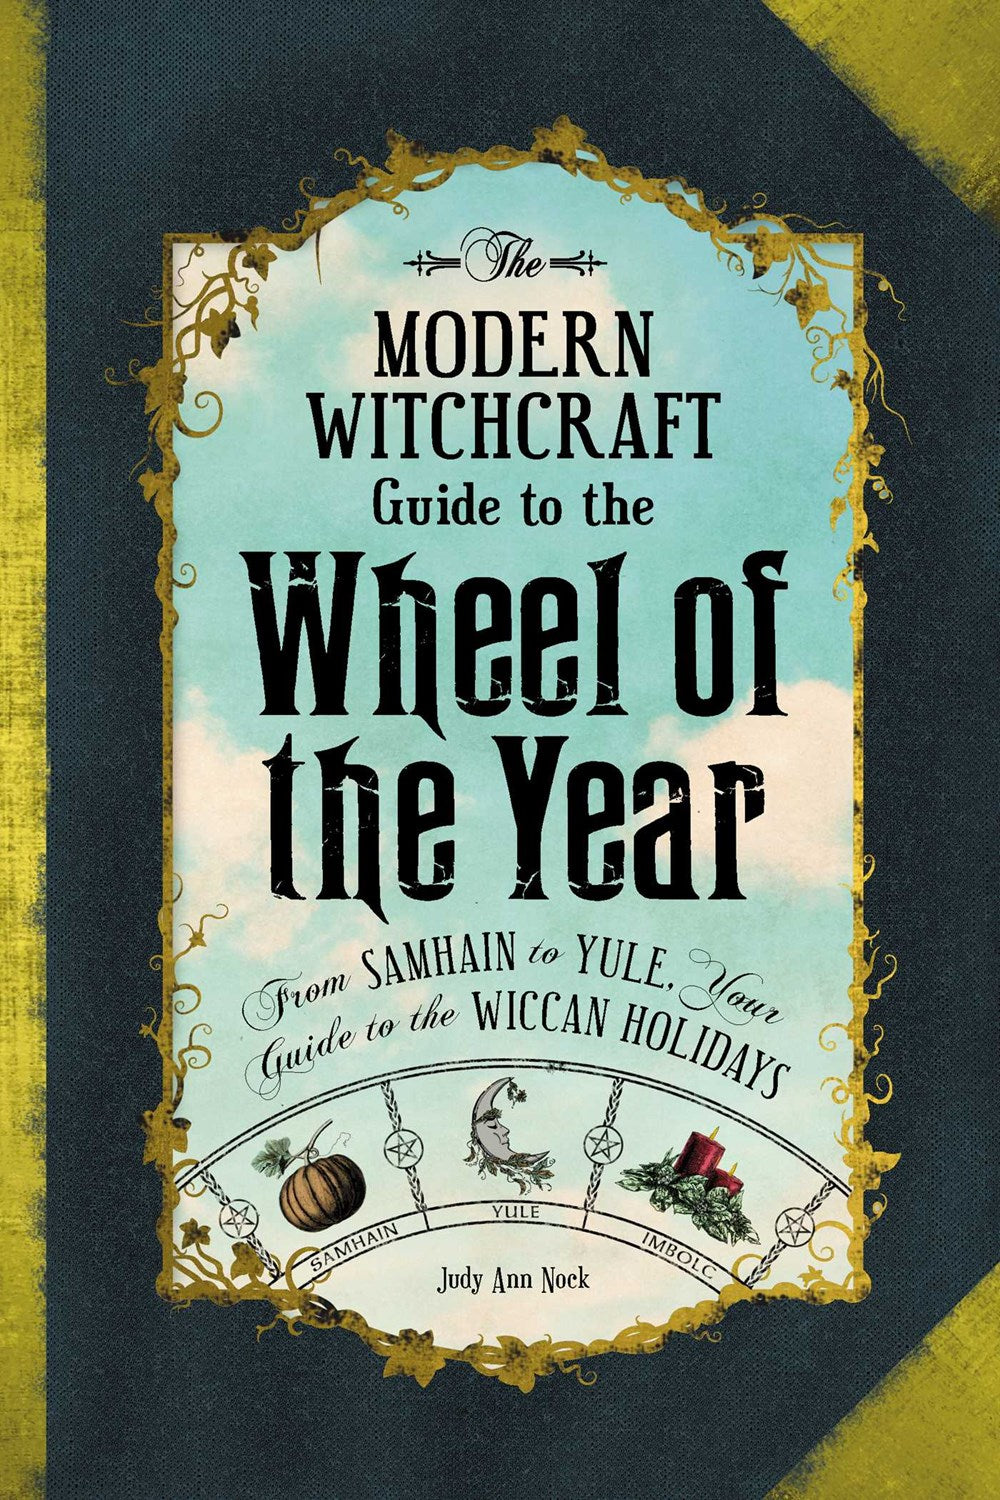 Modern Witchcraft Guide to the Wheel of the Year